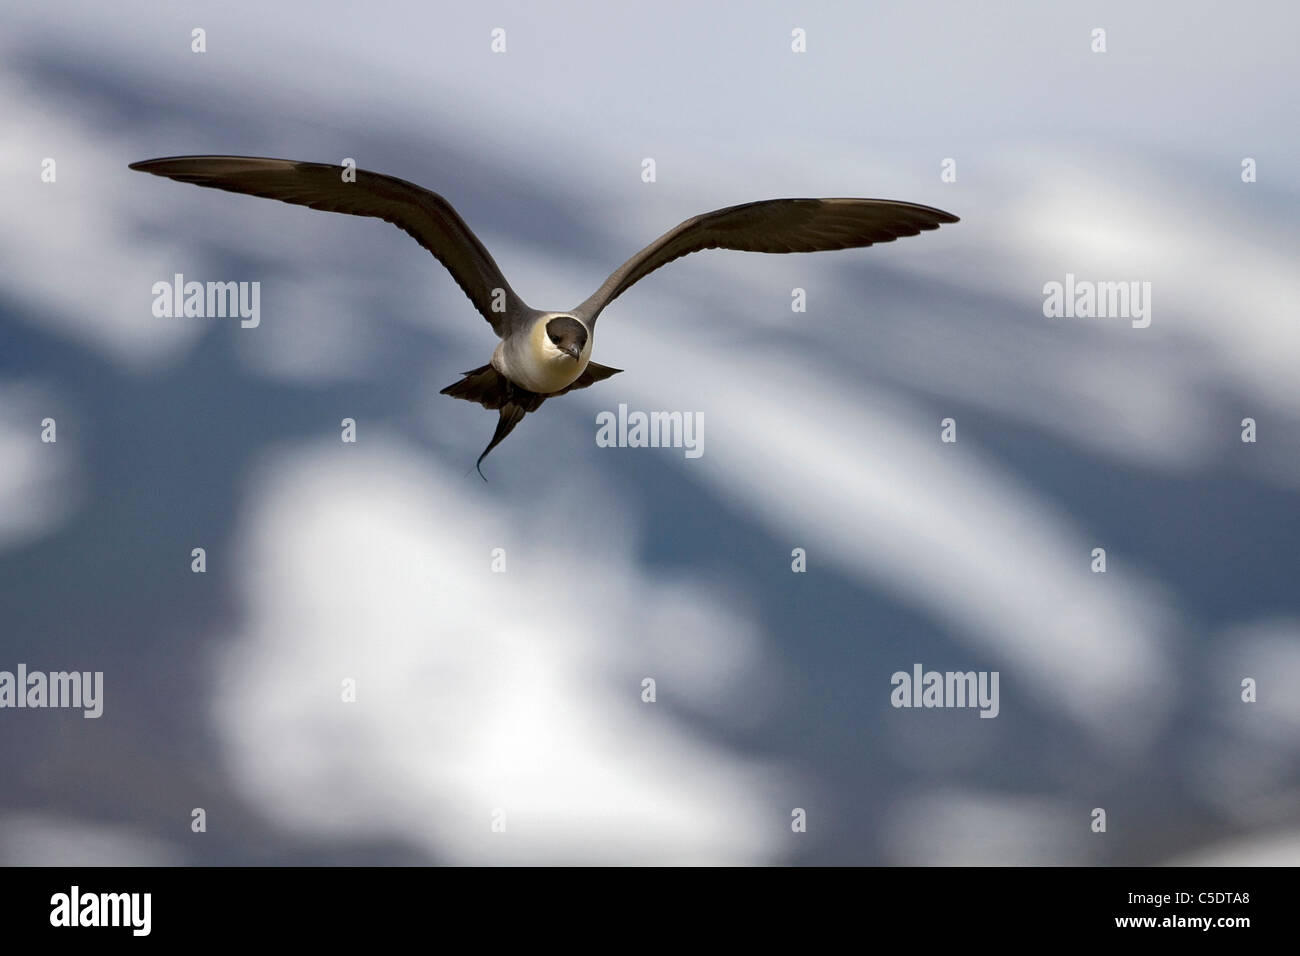 Skua bird in flight with spread wings against blurred background Stock Photo